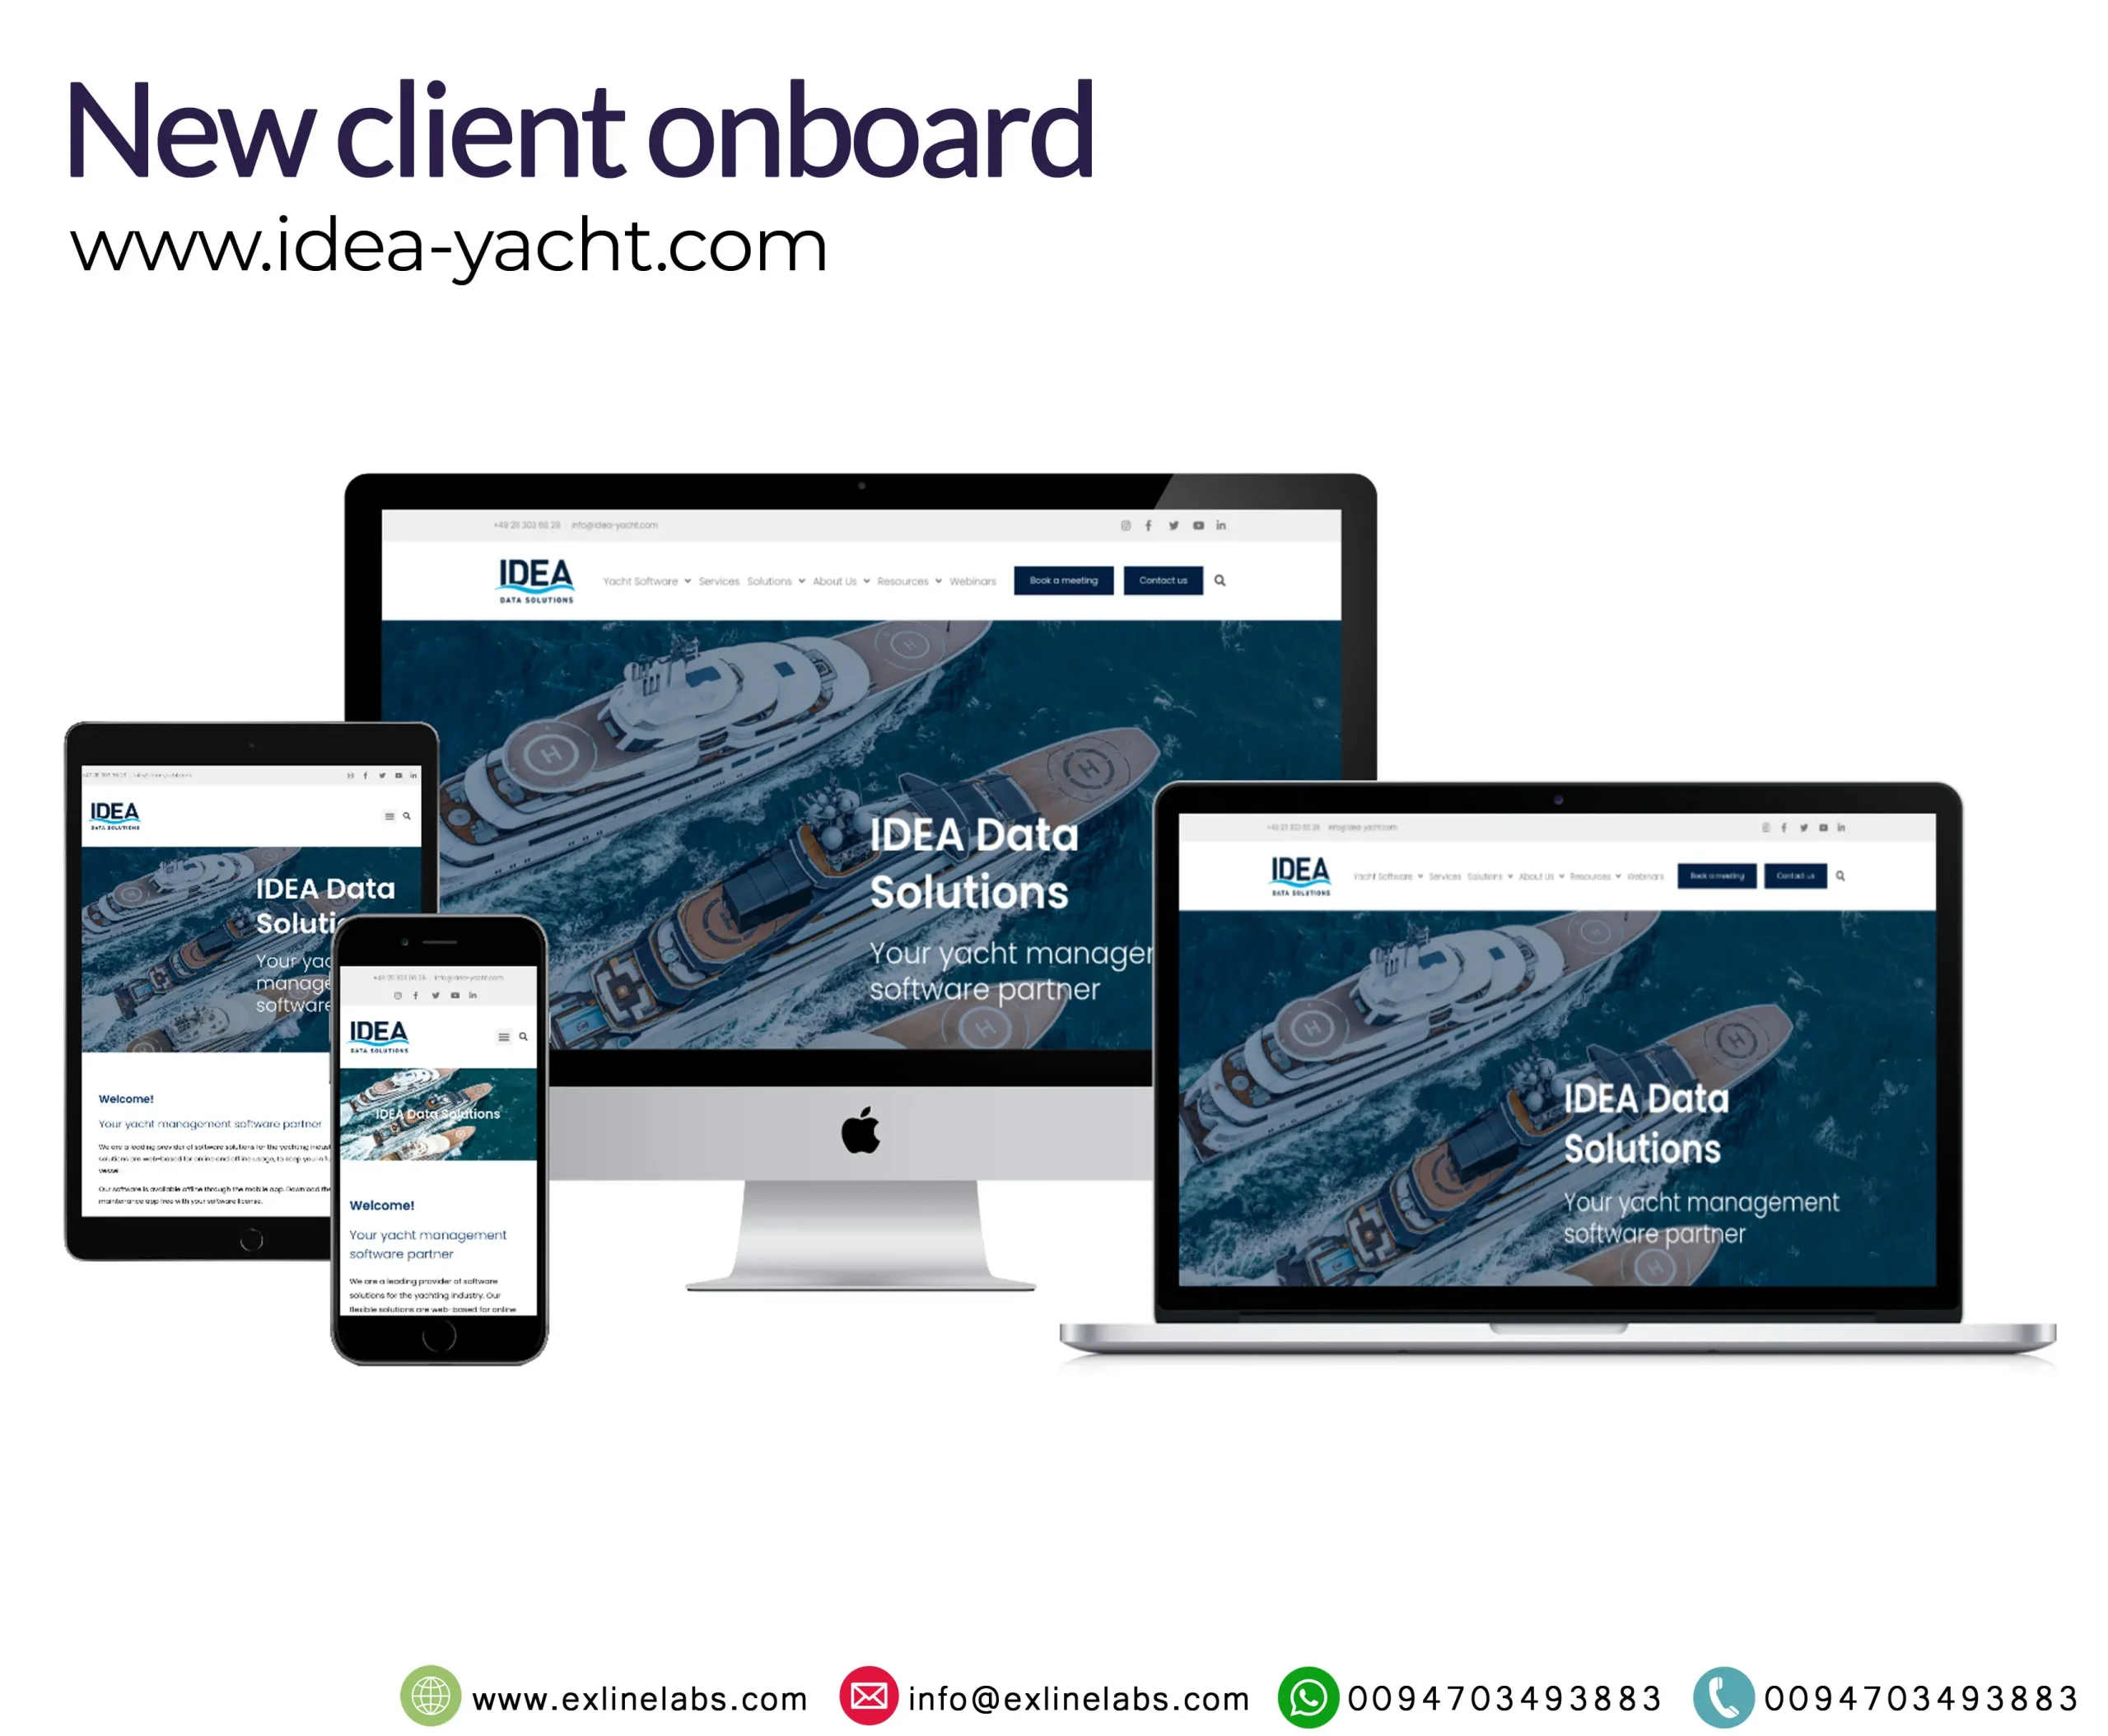 idea-yacht-new-client-onboard-exline-labs